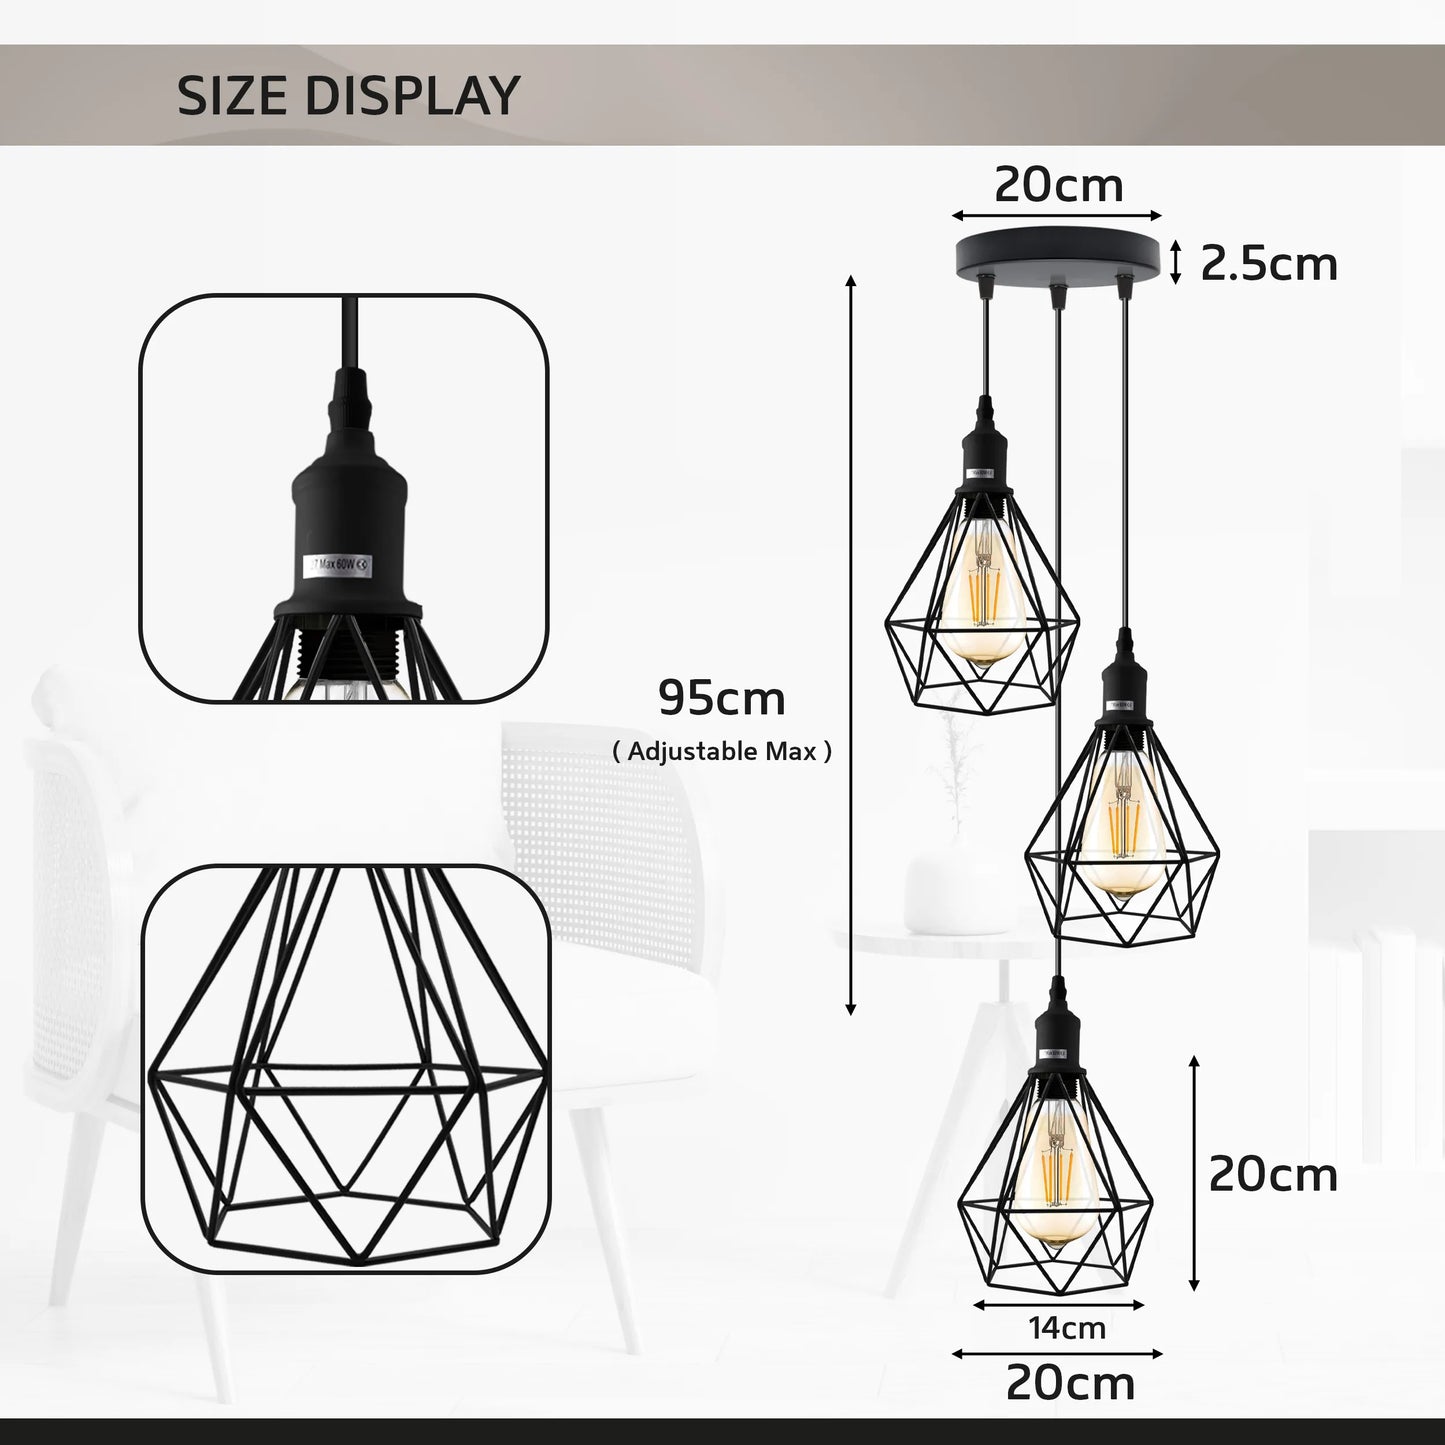 Stunning White Diamond Cage Pendant Light for Living Room, Bar, or Restaurant - Ideal Lighting Choice for Ambiance and Style